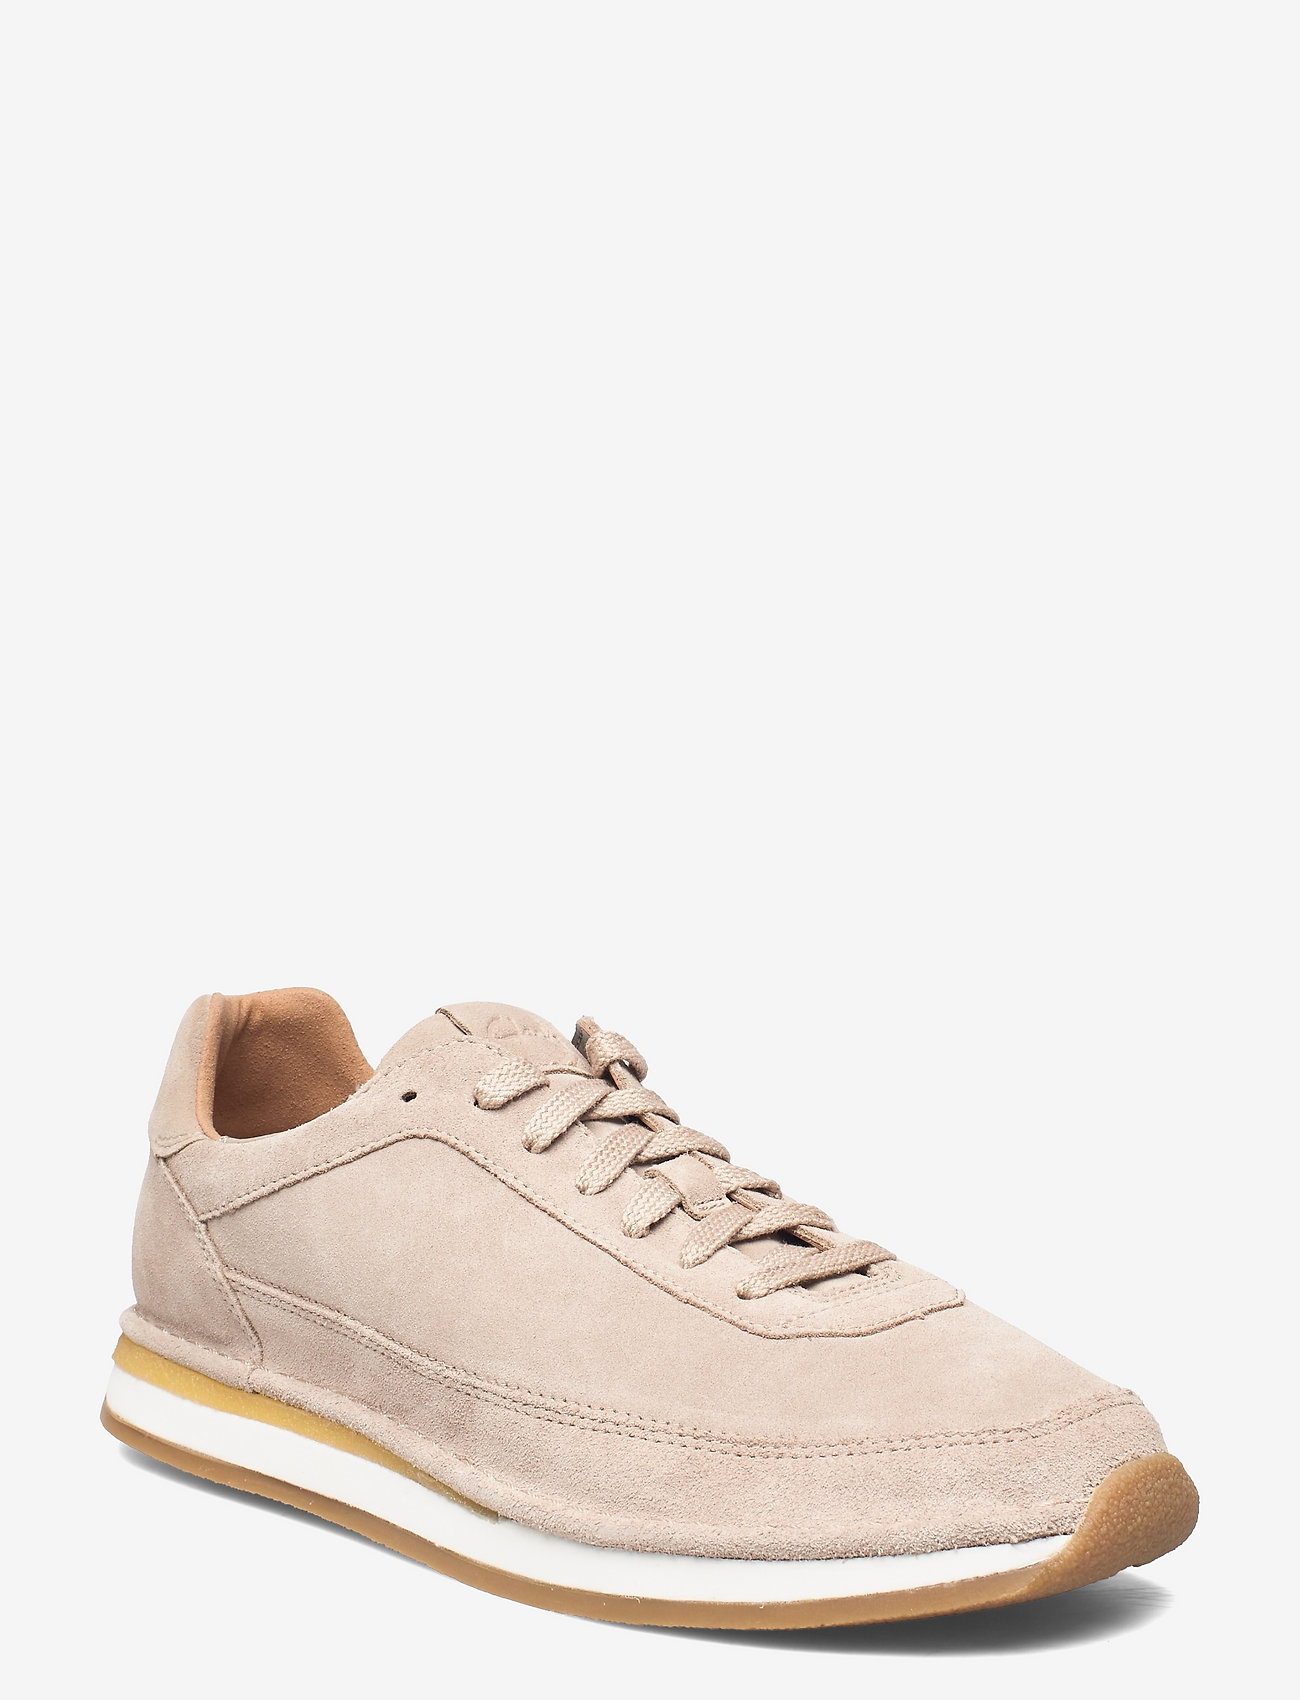 Clarks Craftrun Lace - Low Tops | Boozt.com